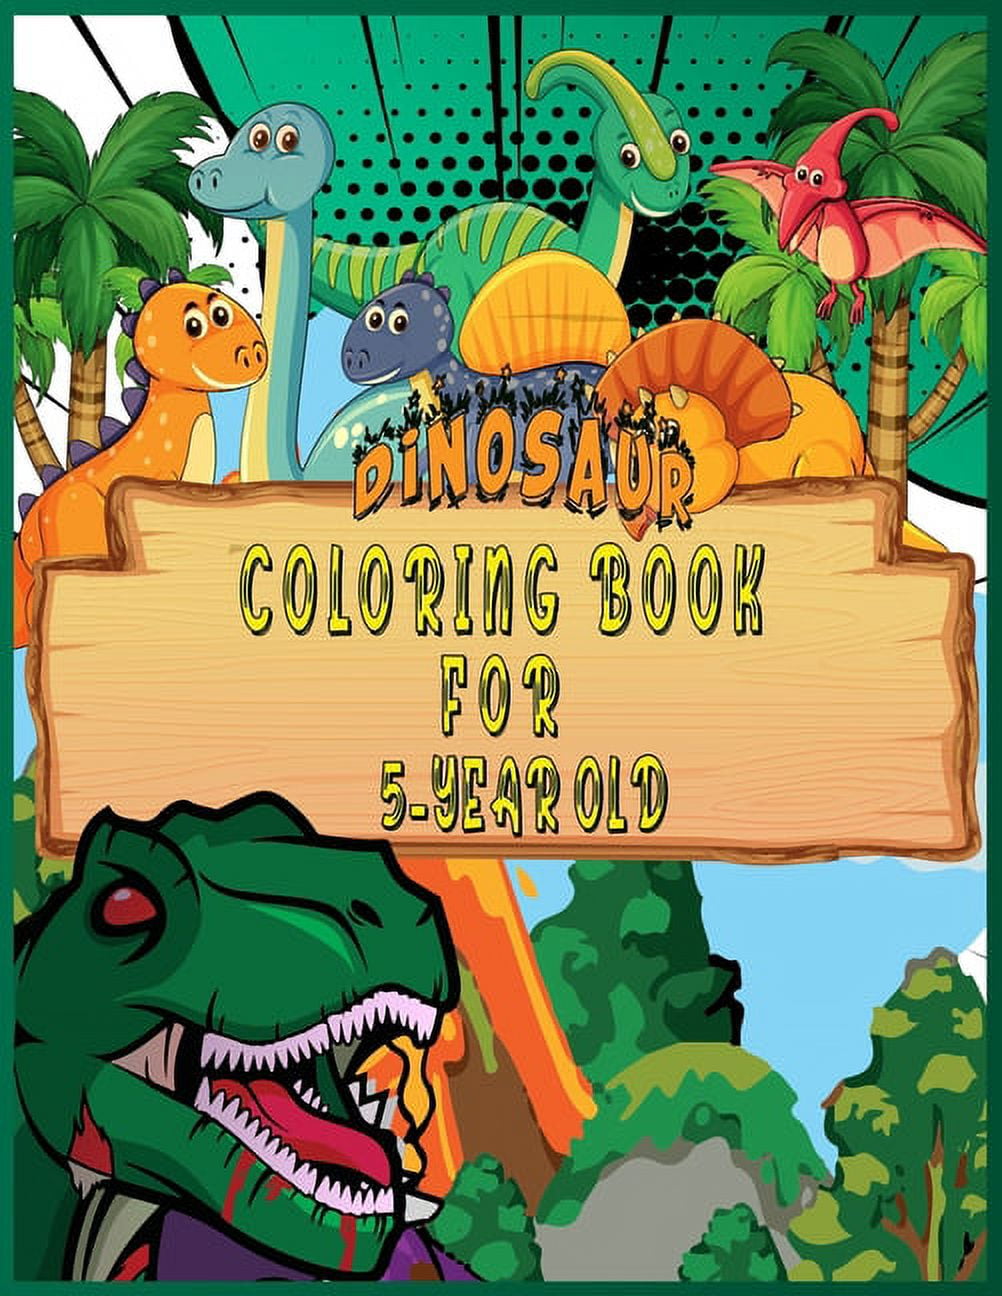 Dinosaur color by numbers for kids ages 4-8: coloring book for kids Great  Gift For Boys, Girls, Toddlers, Preschoolers, Kids 3-8, 6-8 & the  dinosaur-l (Coloring Books #17) (Paperback)